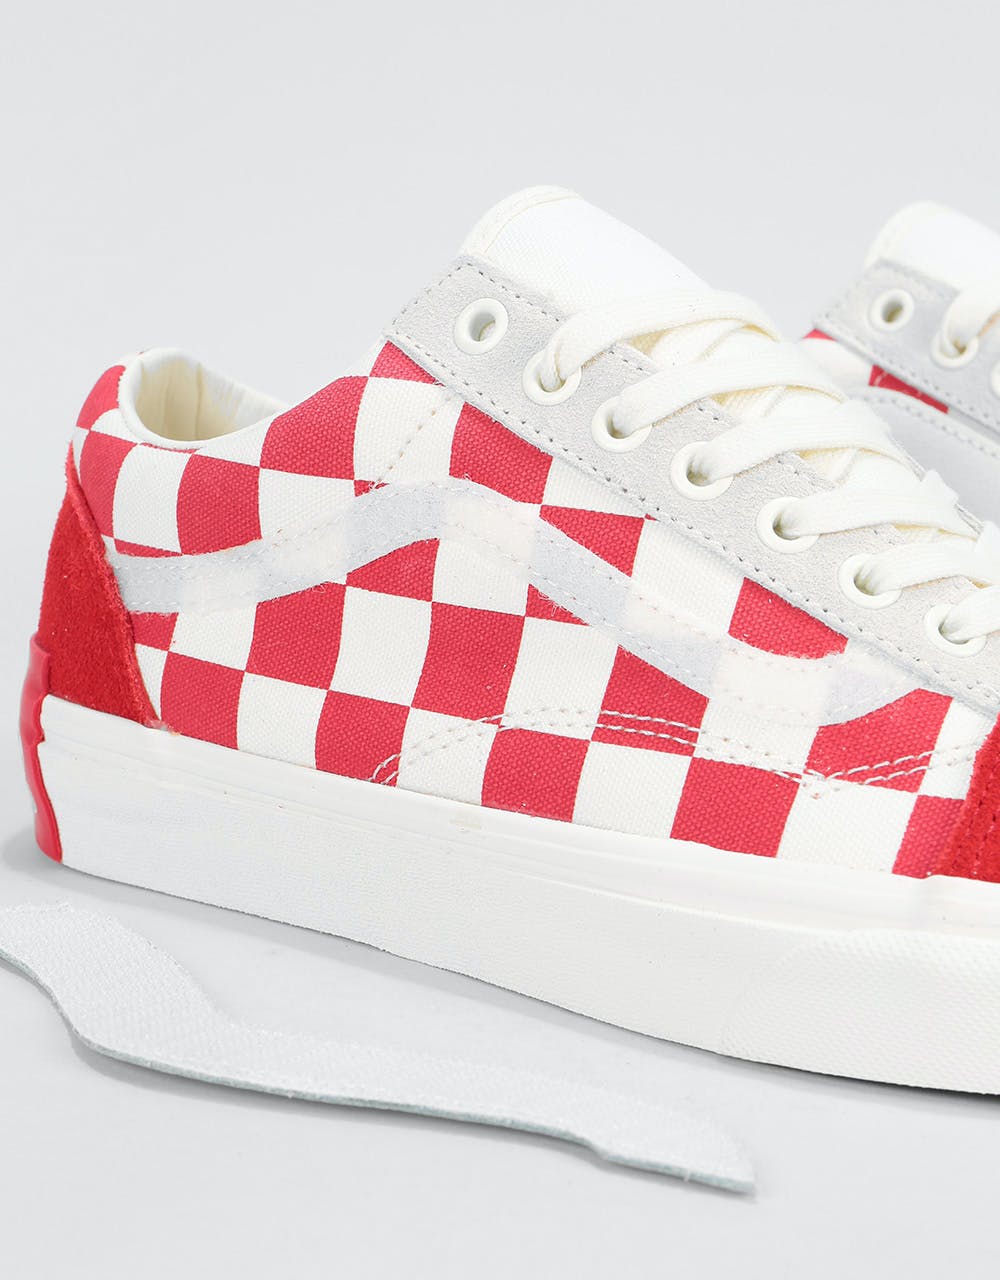 Vans  Old Skool Skate Shoes - (Y.O.P.Purlicue) Racing Red/Marshmallow